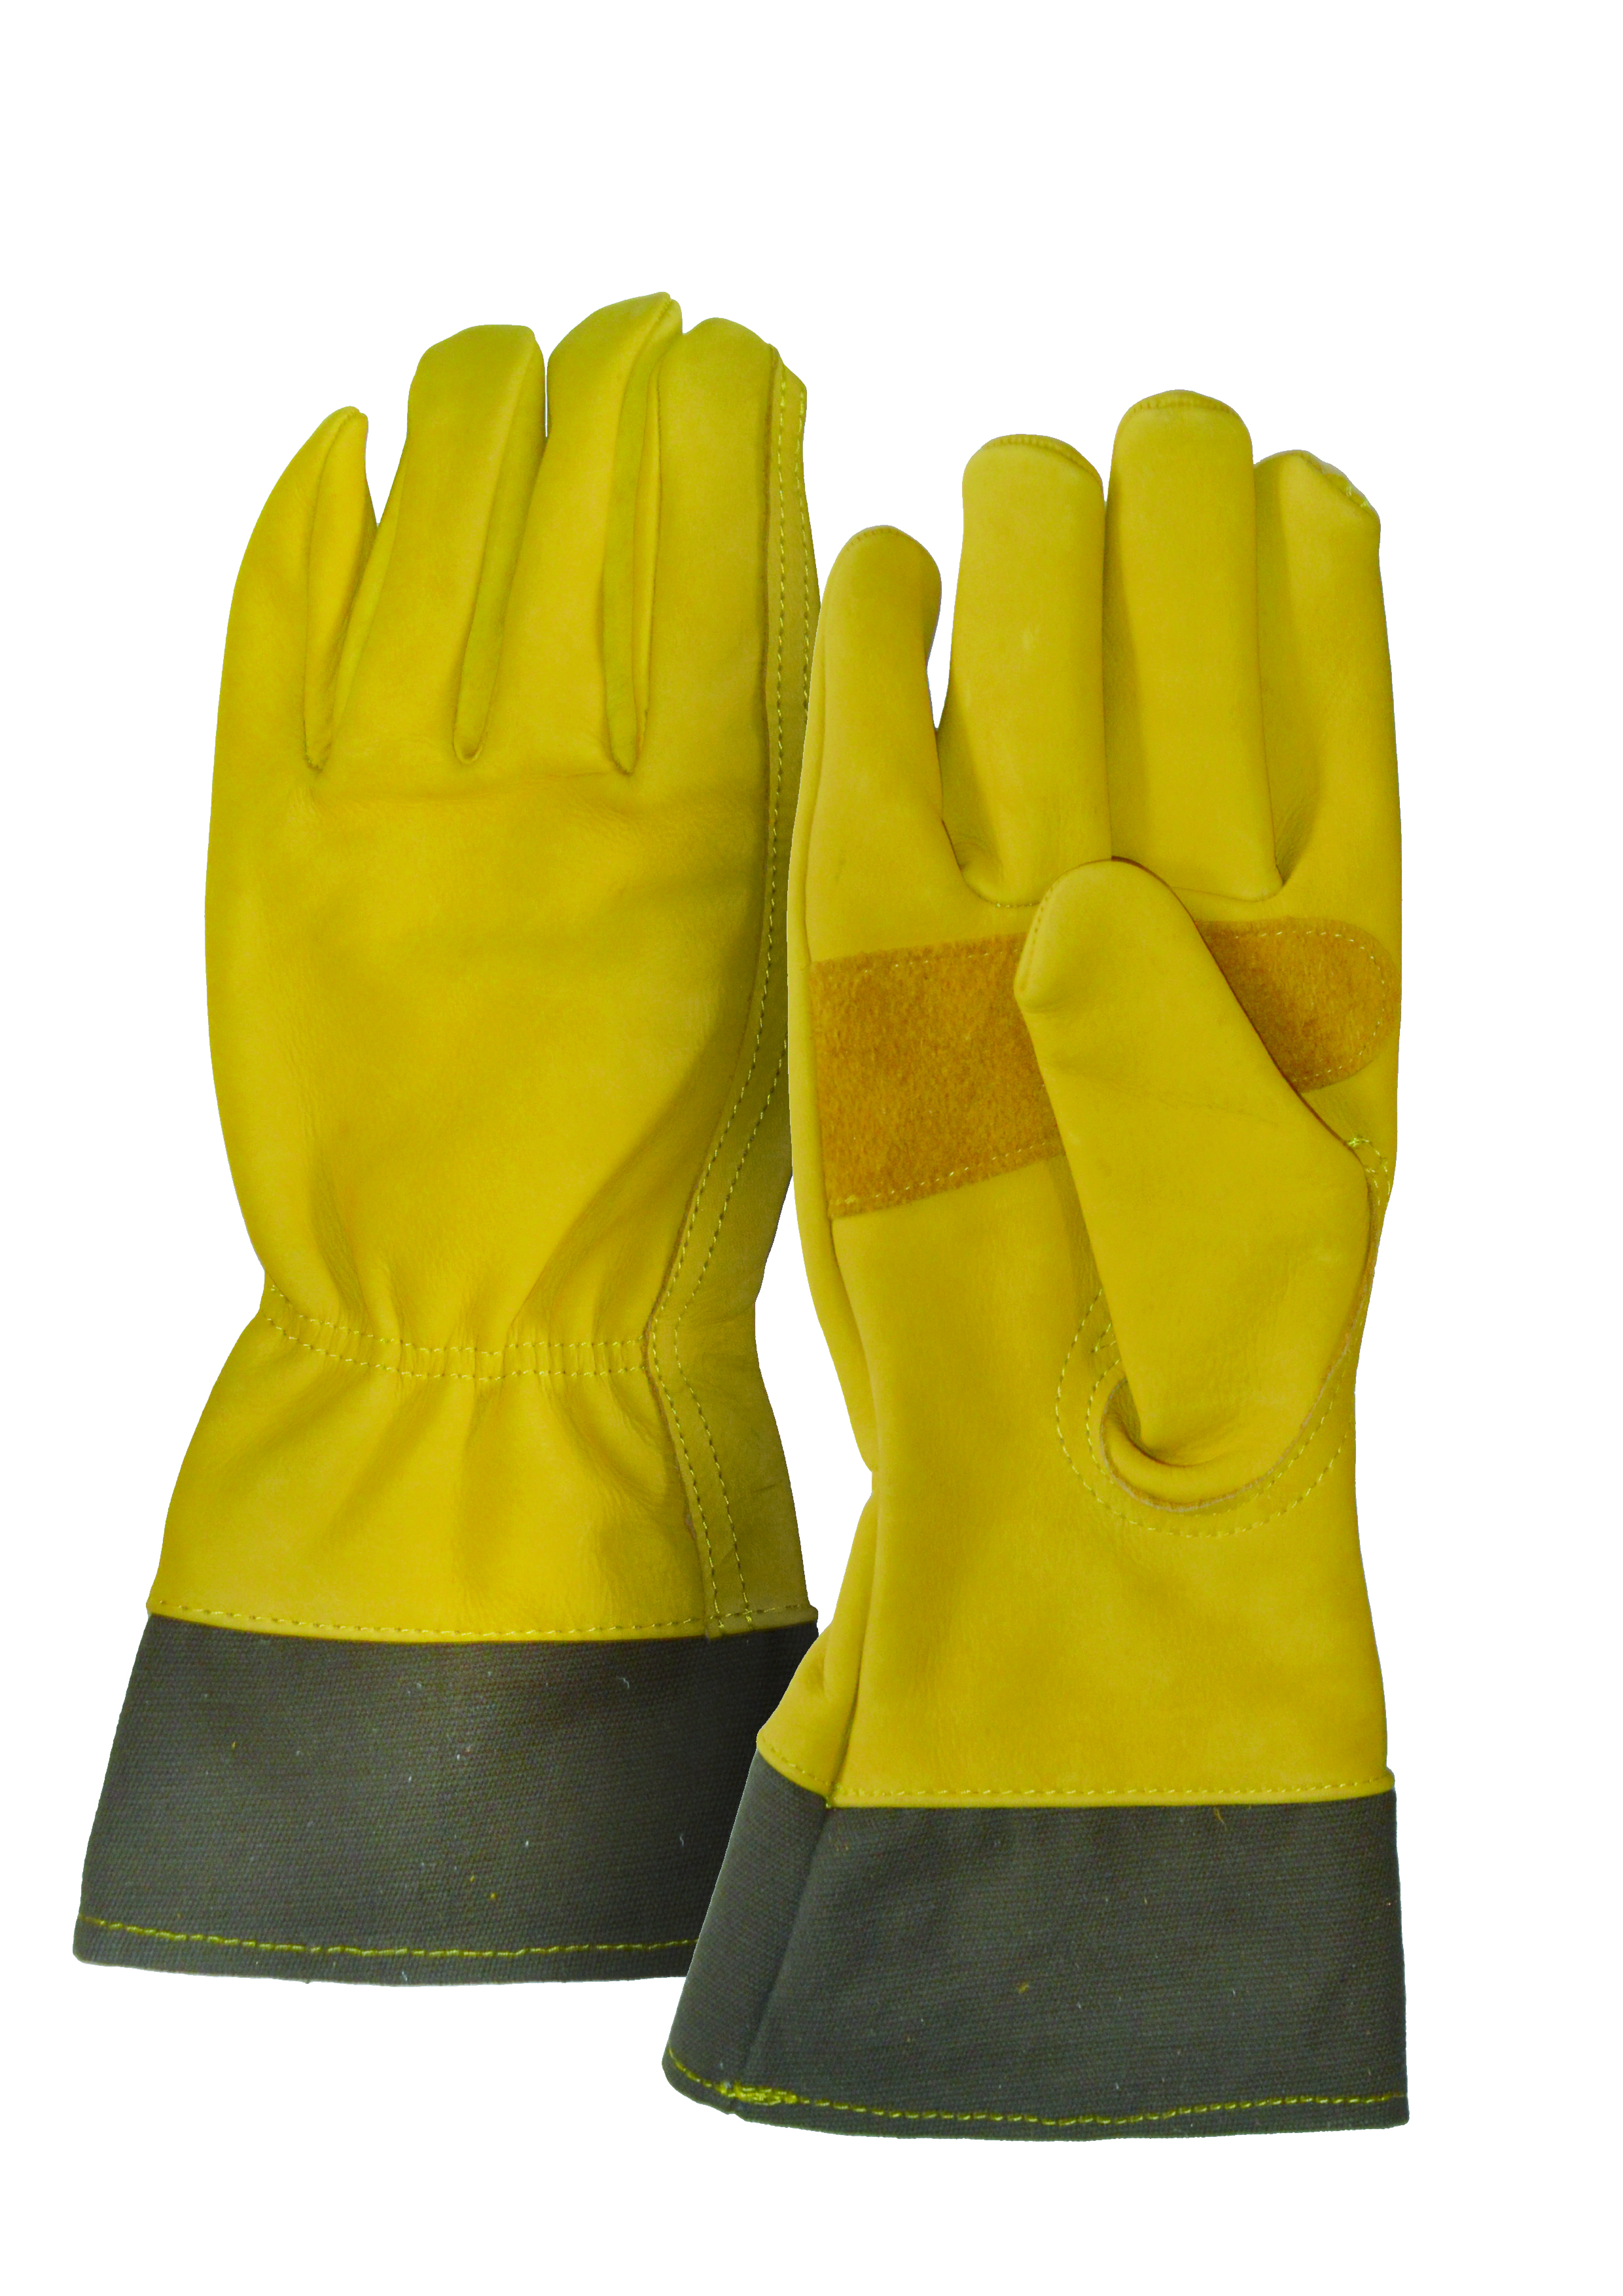 Pittards Leather & Canvas Gauntlet Gloves Small